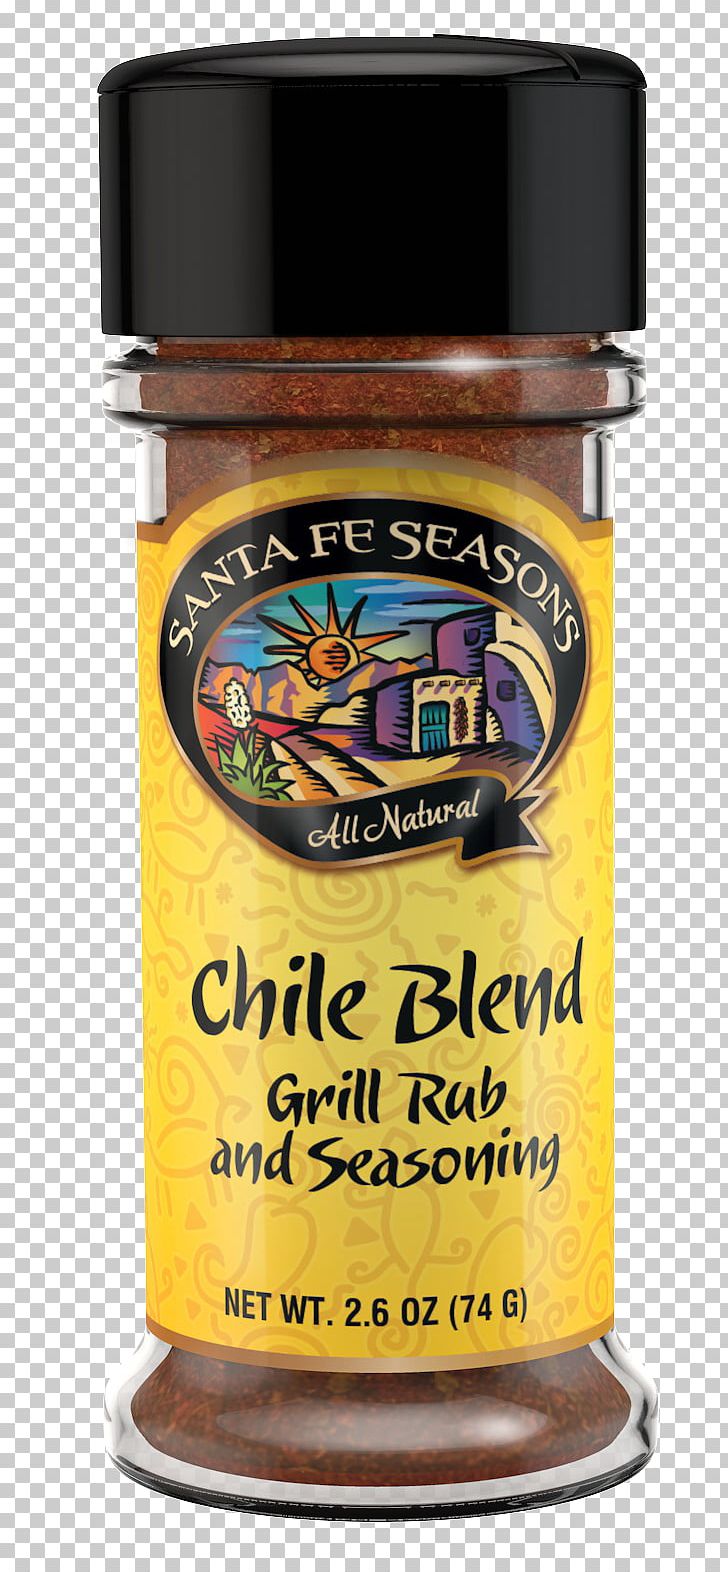 Spice New Mexico Barbecue Sauce Chutney Chili Pepper PNG, Clipart, Barbecue Sauce, Box, Chili Pepper, Chipotle, Chipotle Mexican Grill Free PNG Download